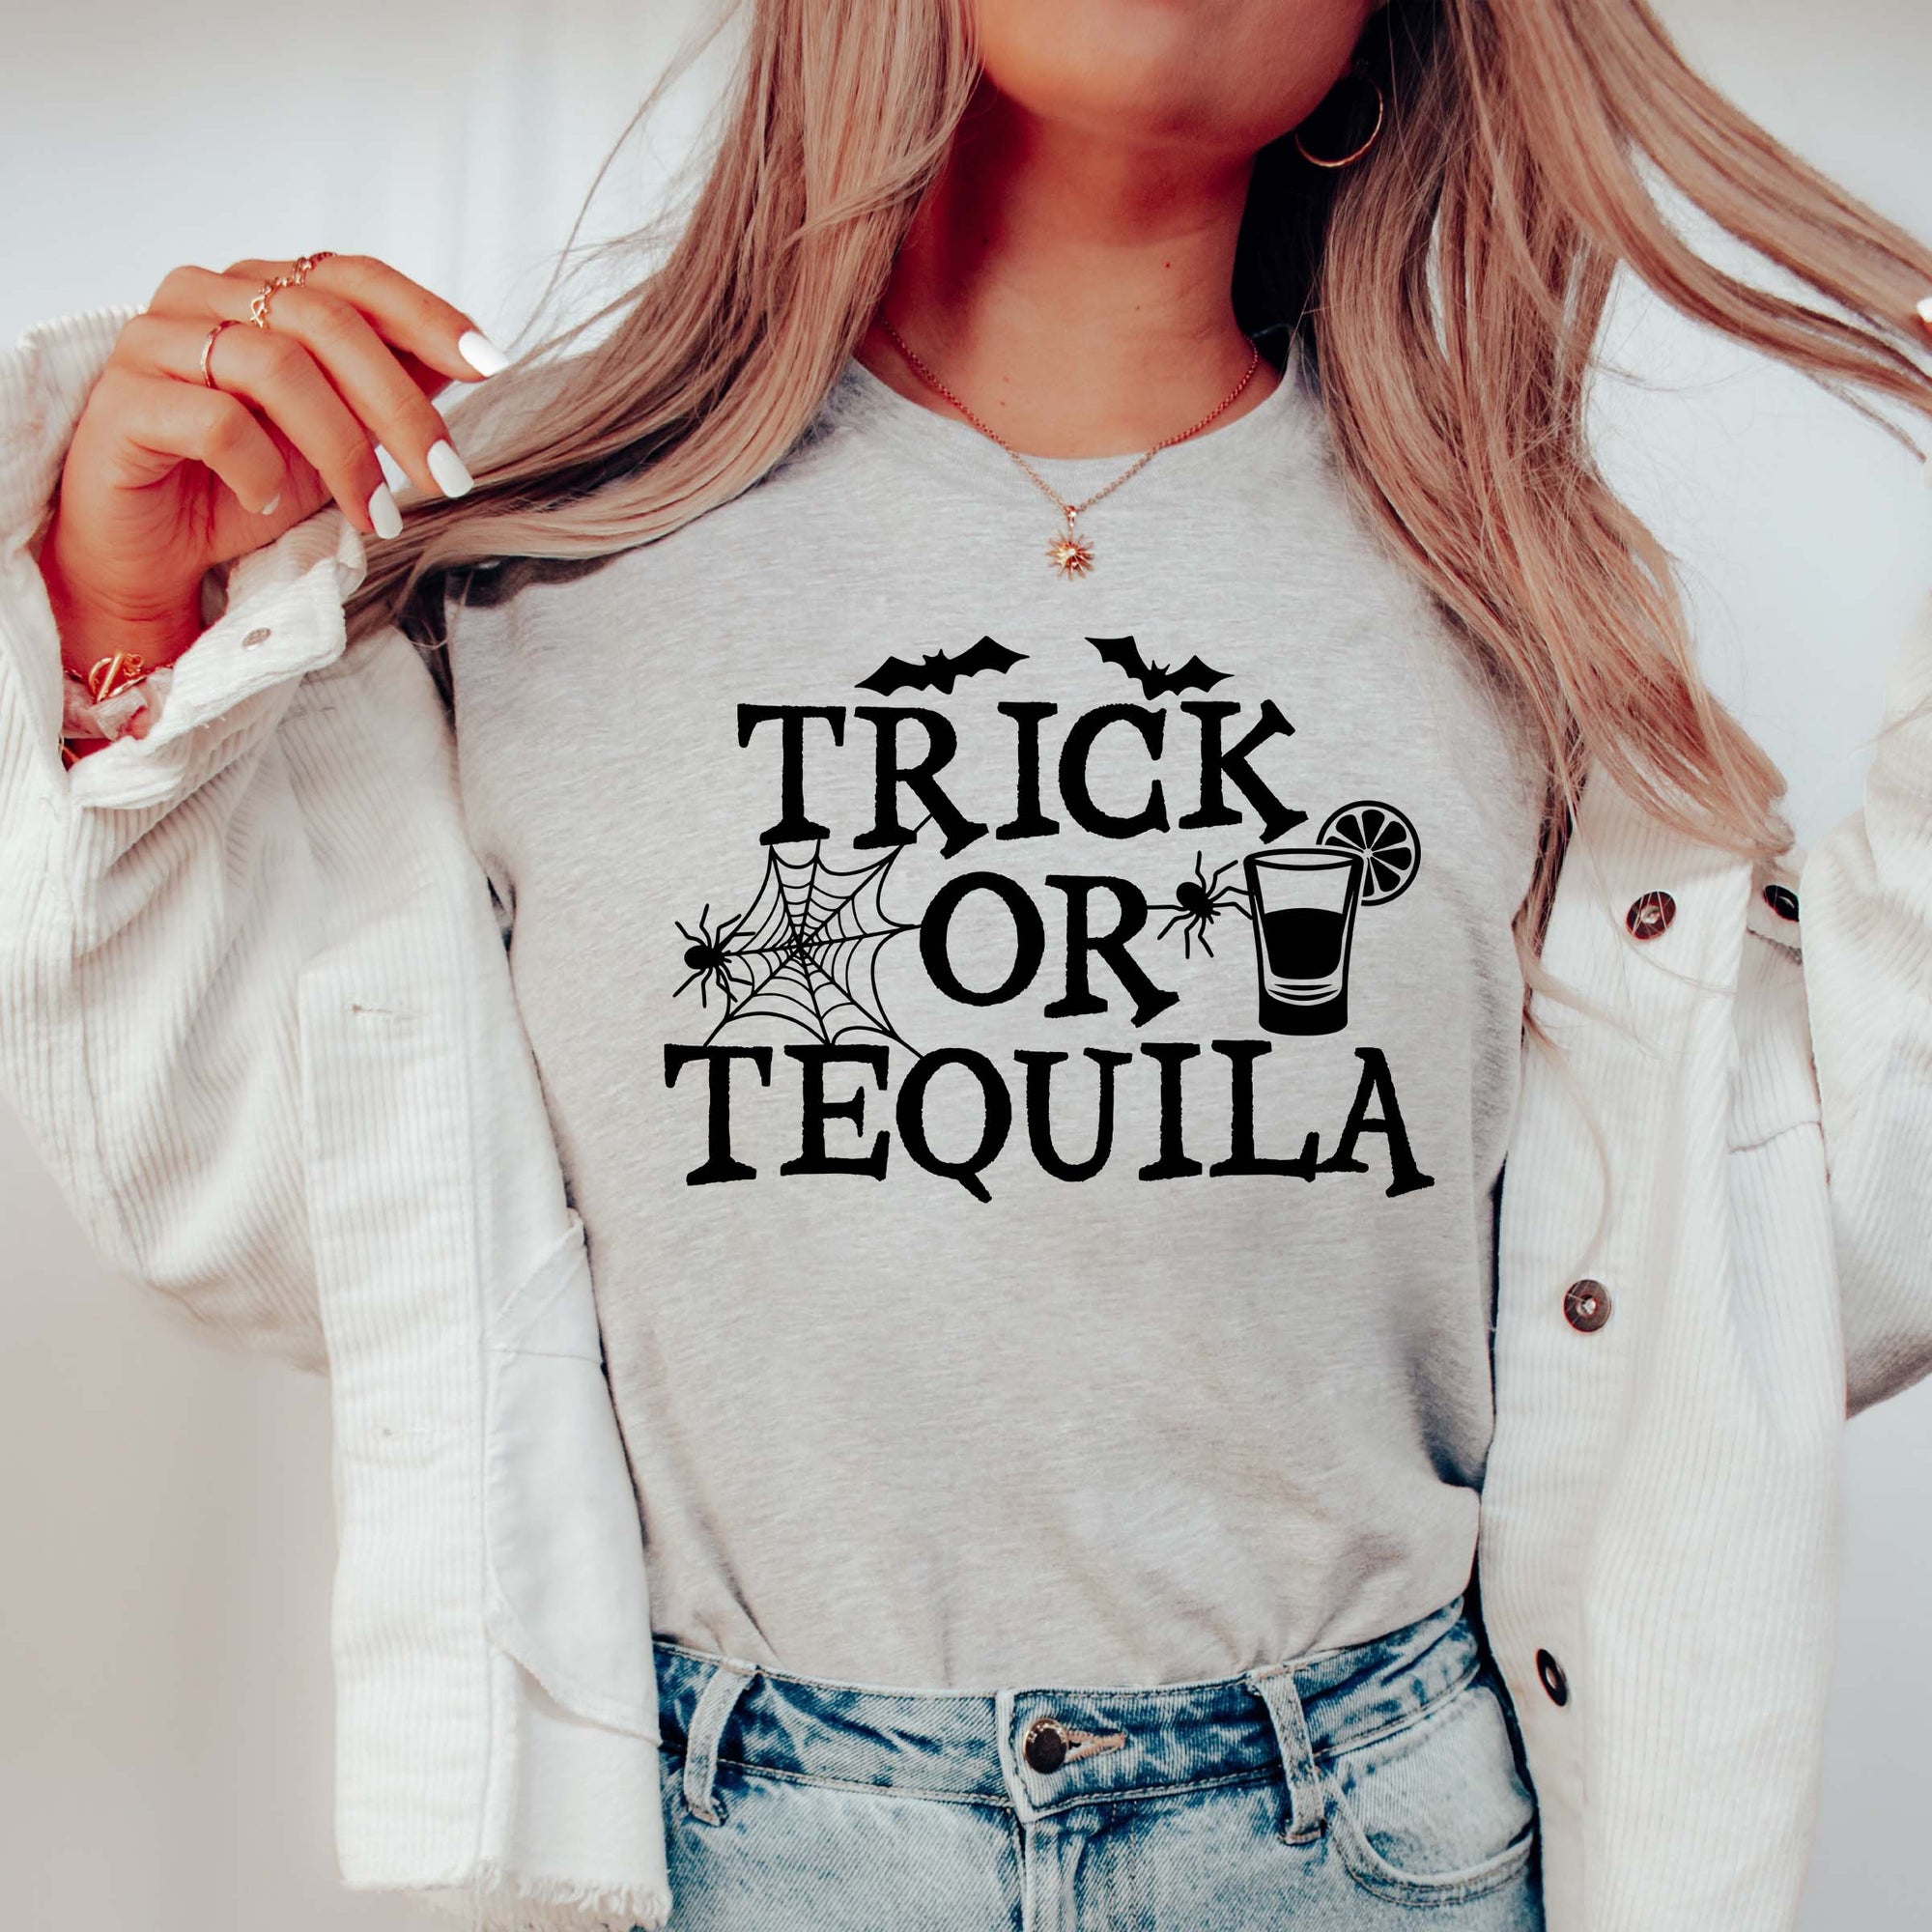 Trick or Tequila tee